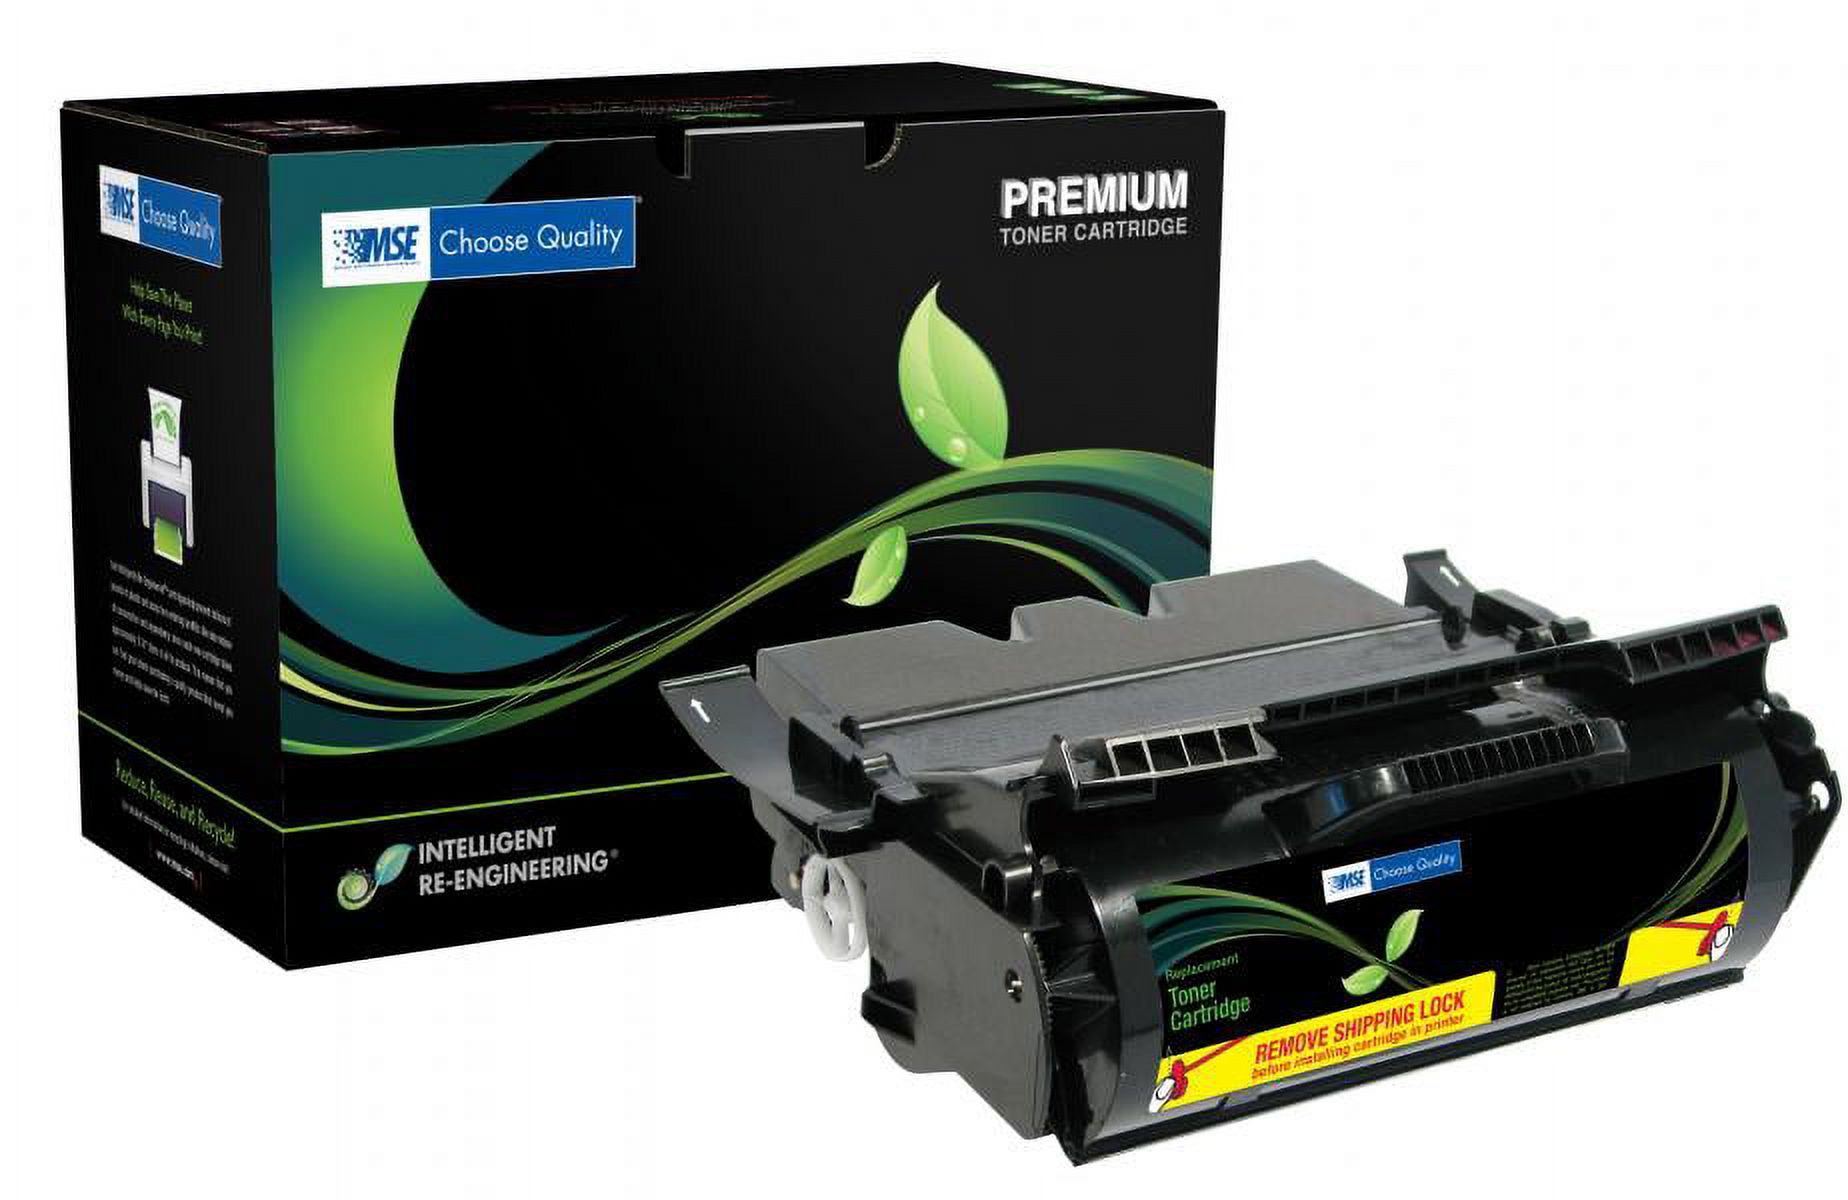 MSE Remanufactured Universal High Yield Toner Cartridge for Lexmark T640/T642/T644, Dell 5210/5310, IBM 1532/1552/1572 - image 2 of 2